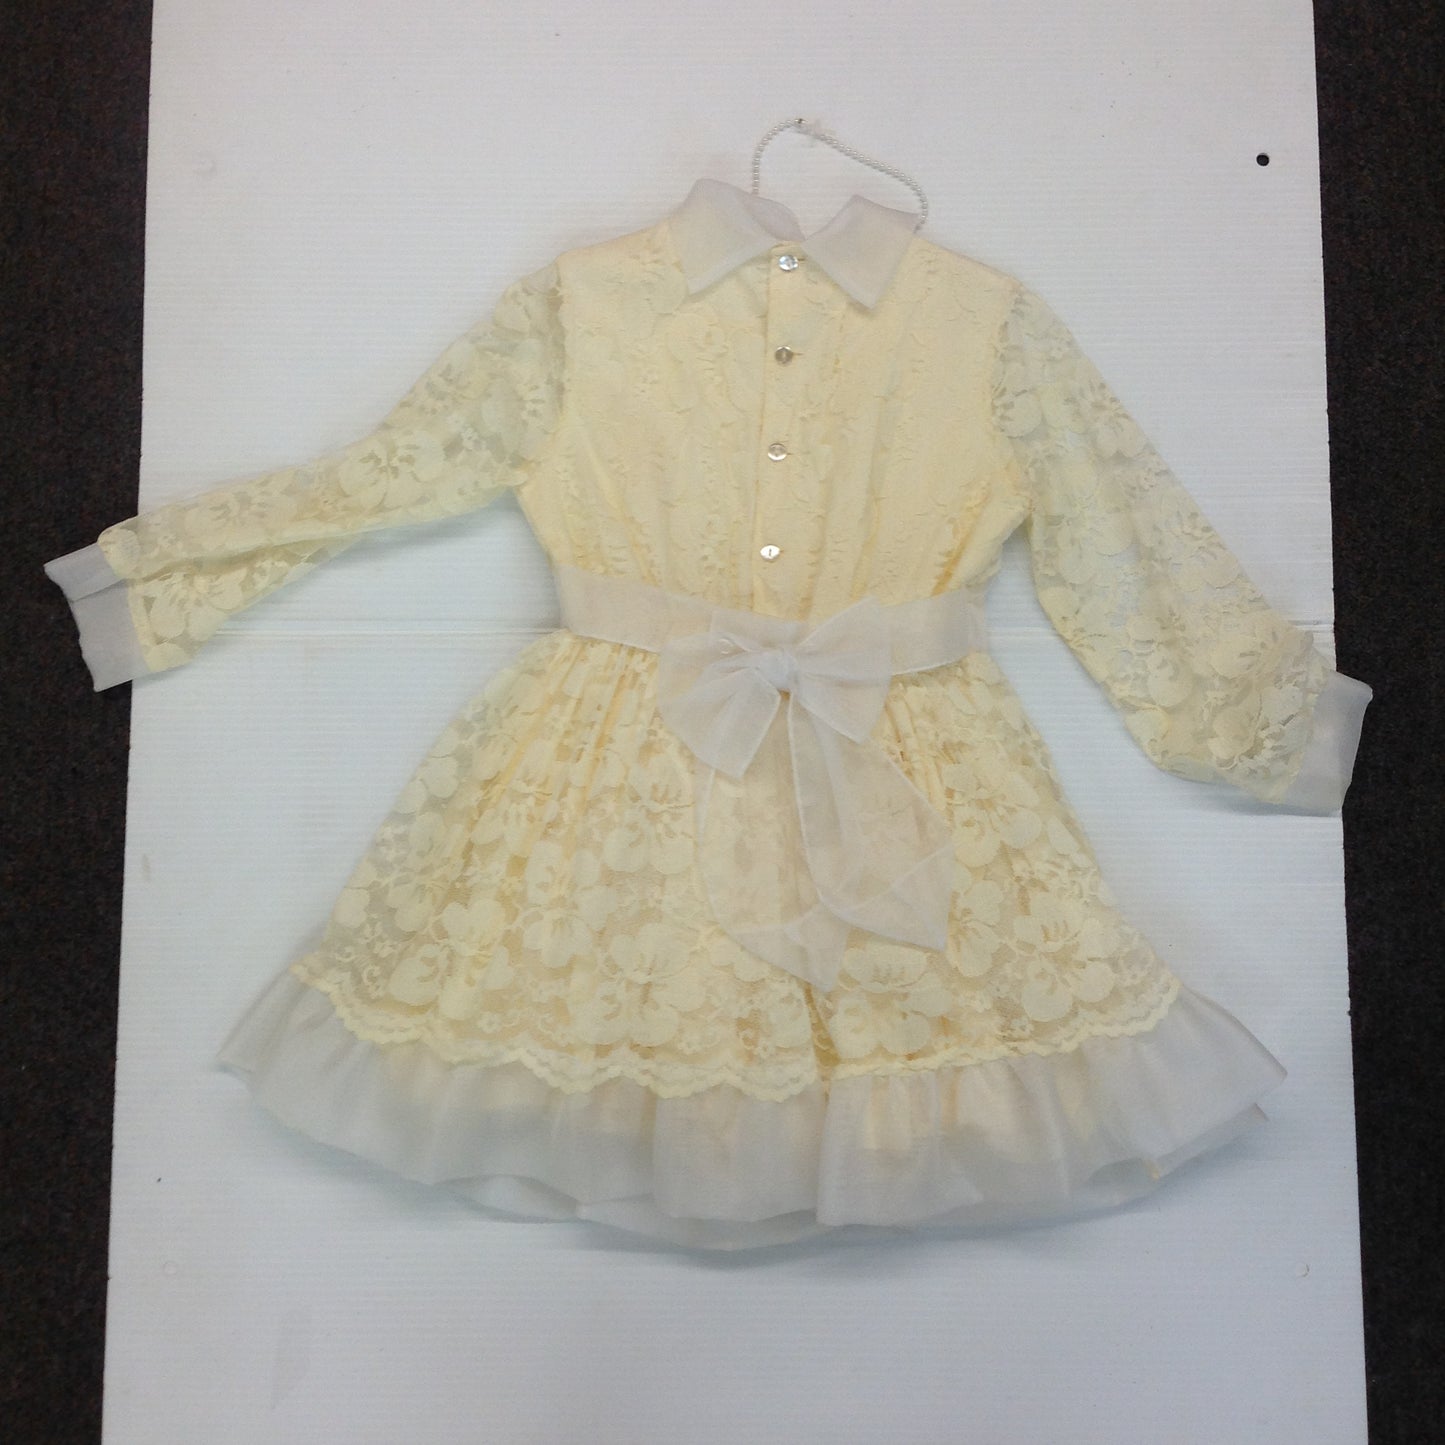 Vintage 1980's Girls White Cream Communion Dress with Beaded Cross Necklace Lace